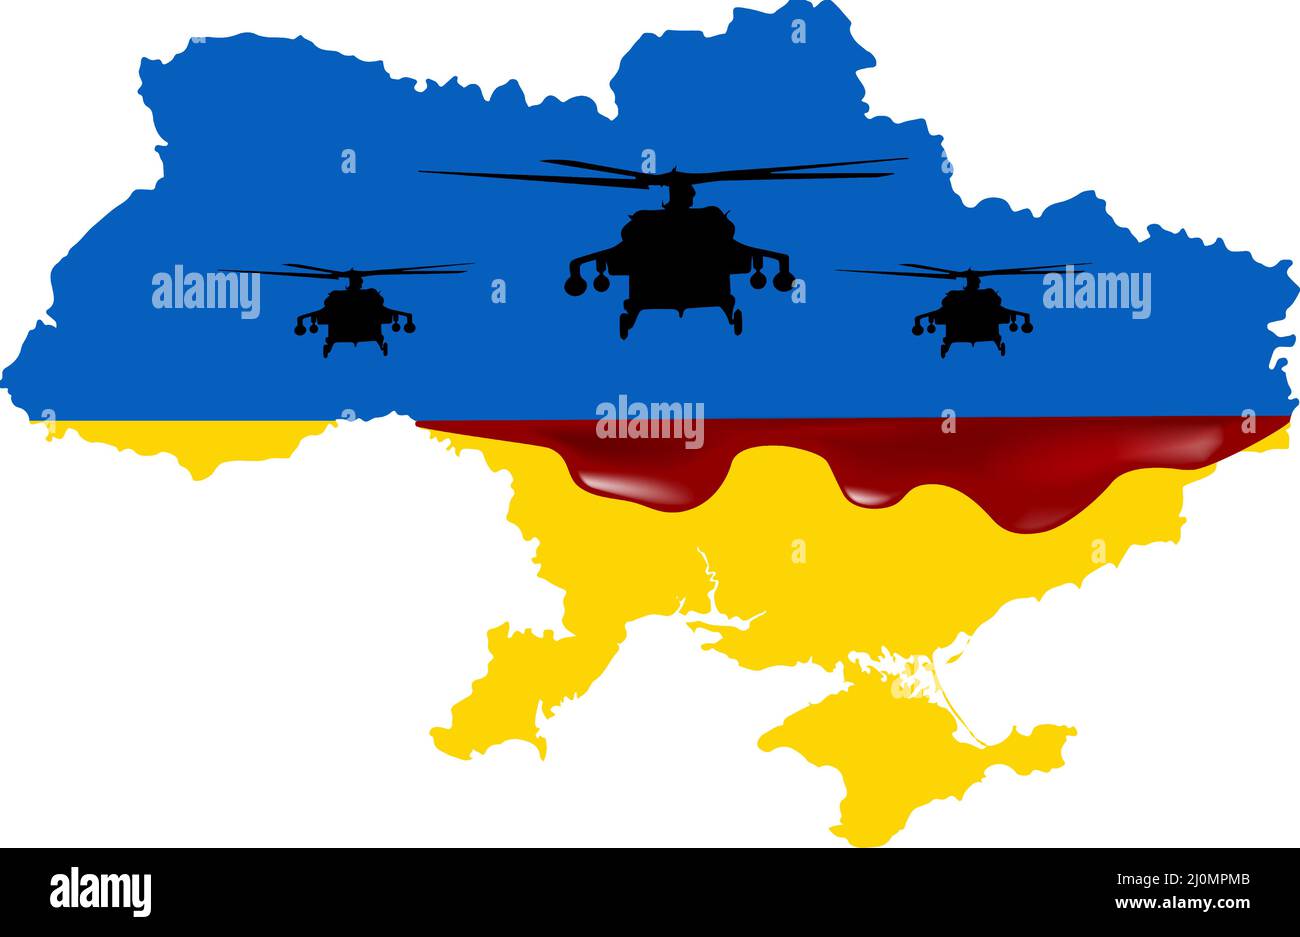 Military helicopter against background of Ukrainian flag. Russia's invasion of Ukraine. Stock Vector